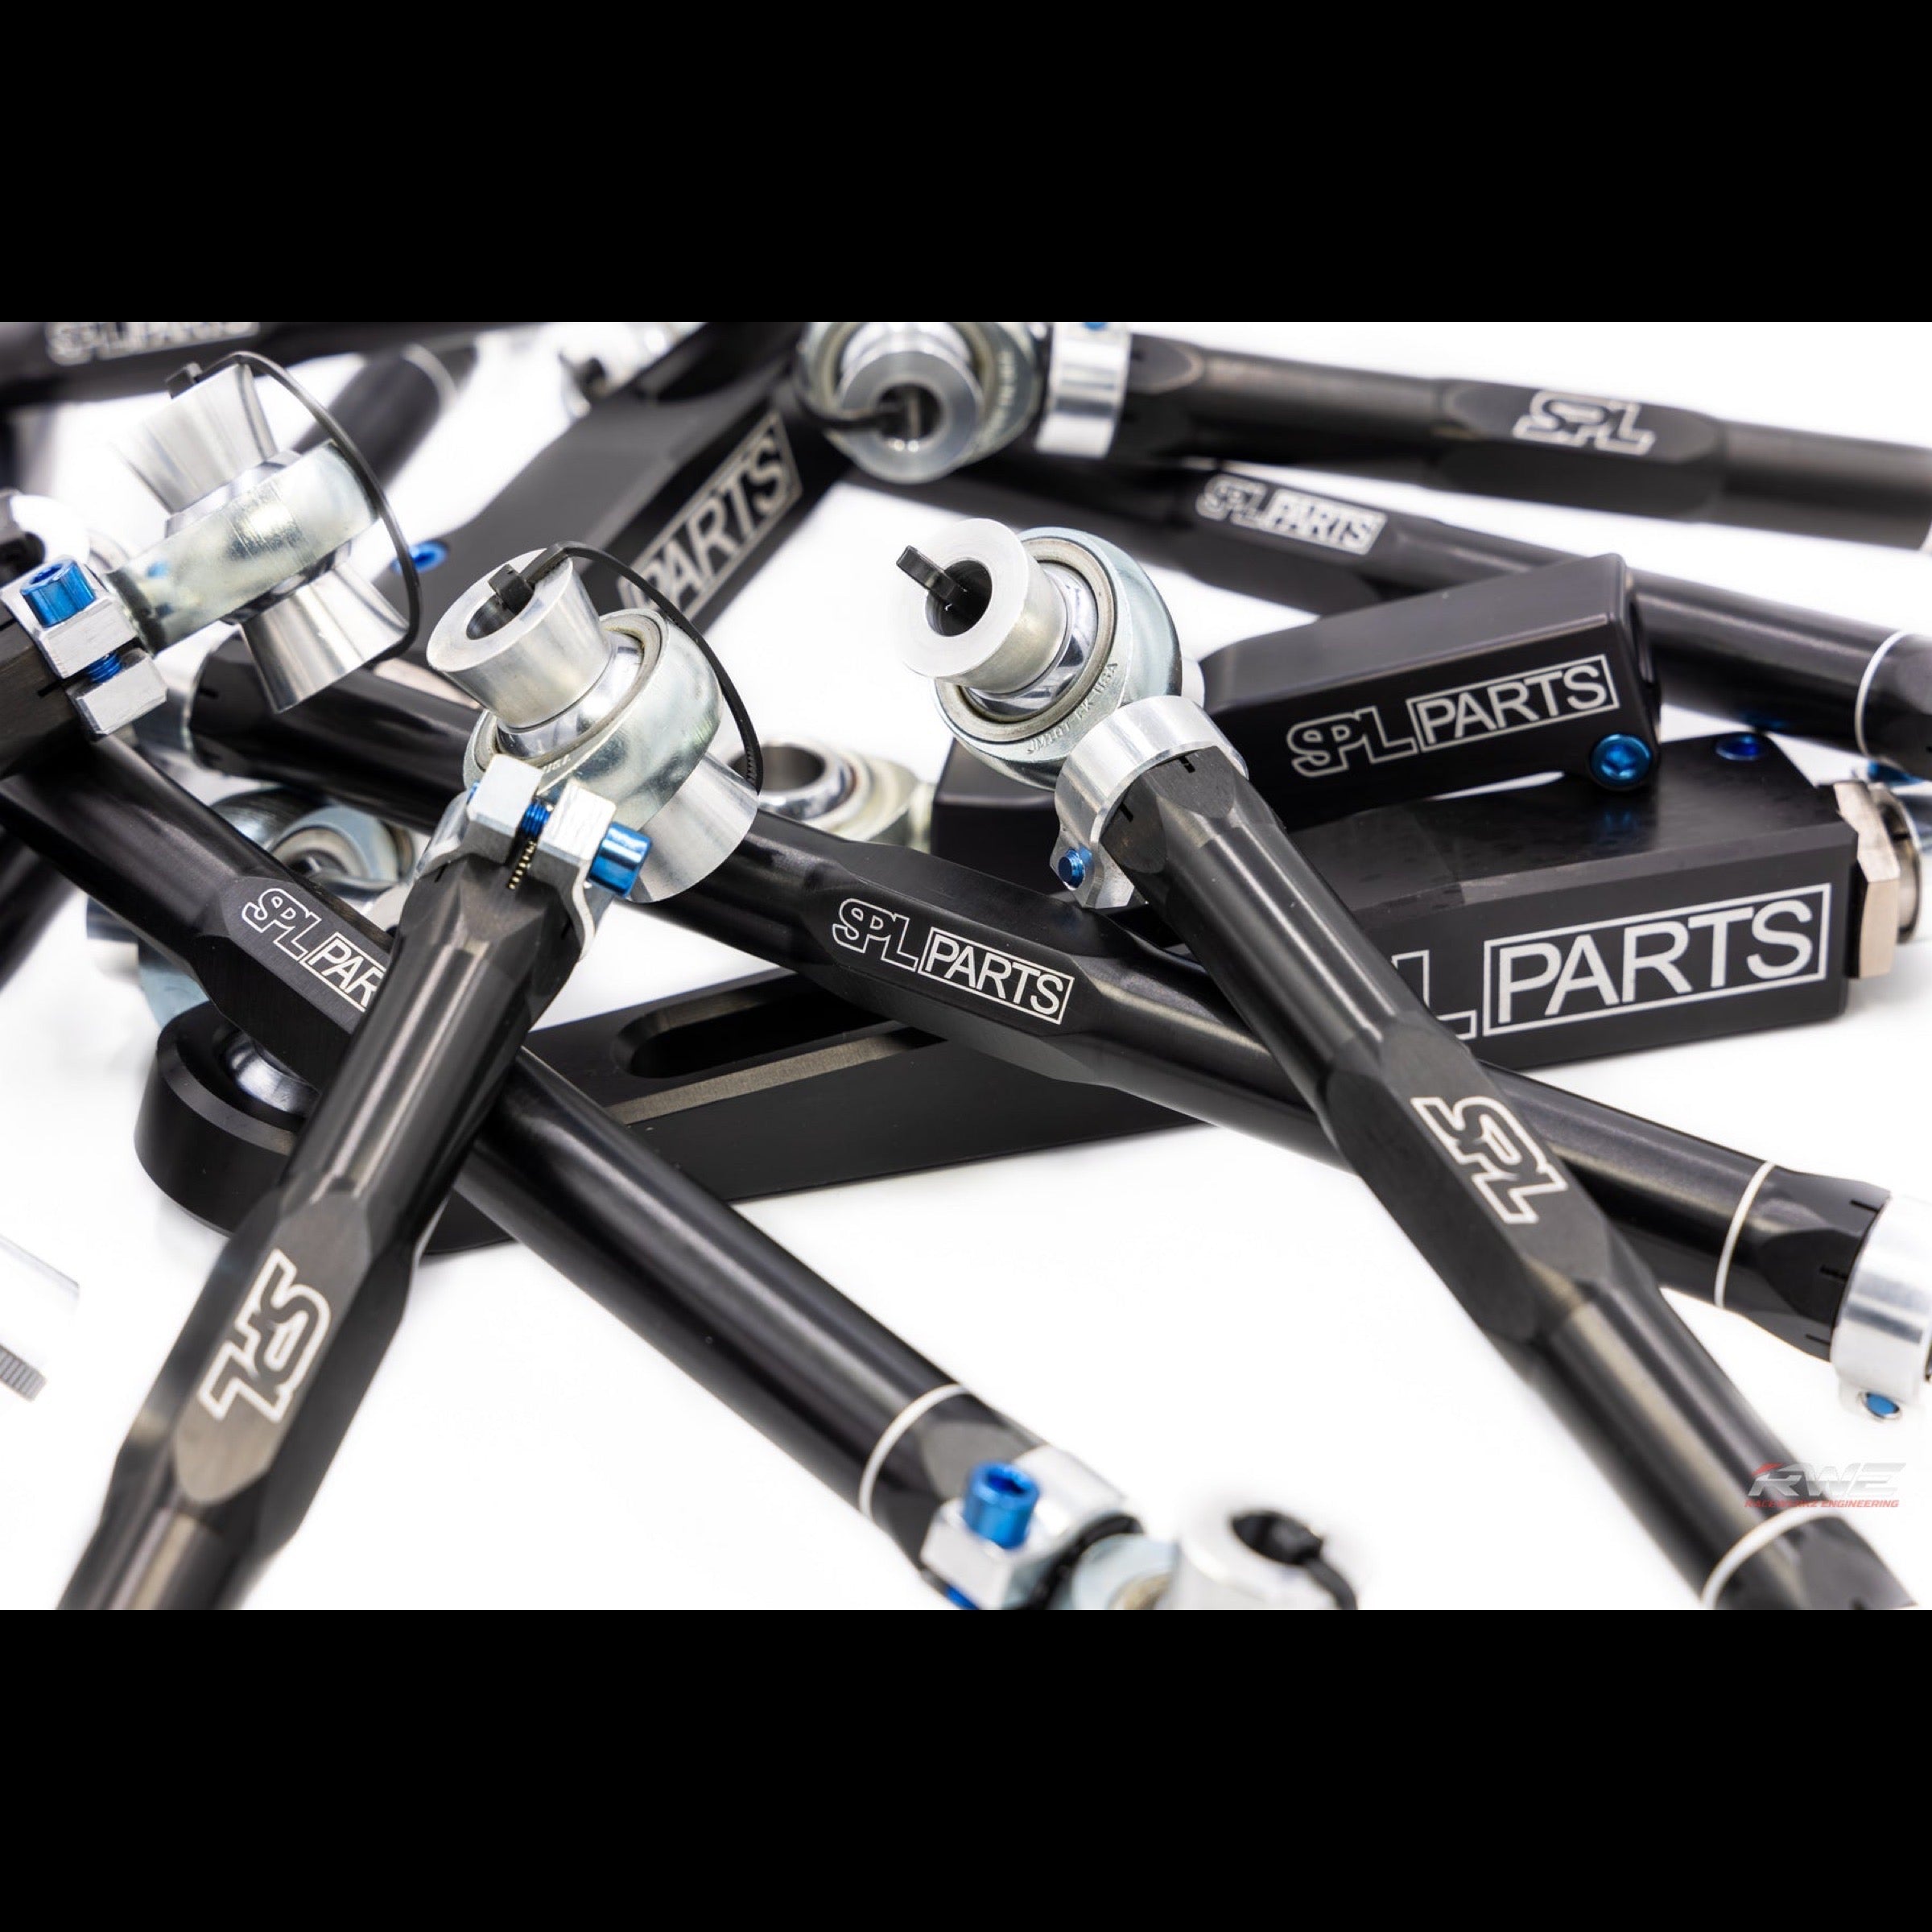 SPL Parts suspension arms in black with a white background